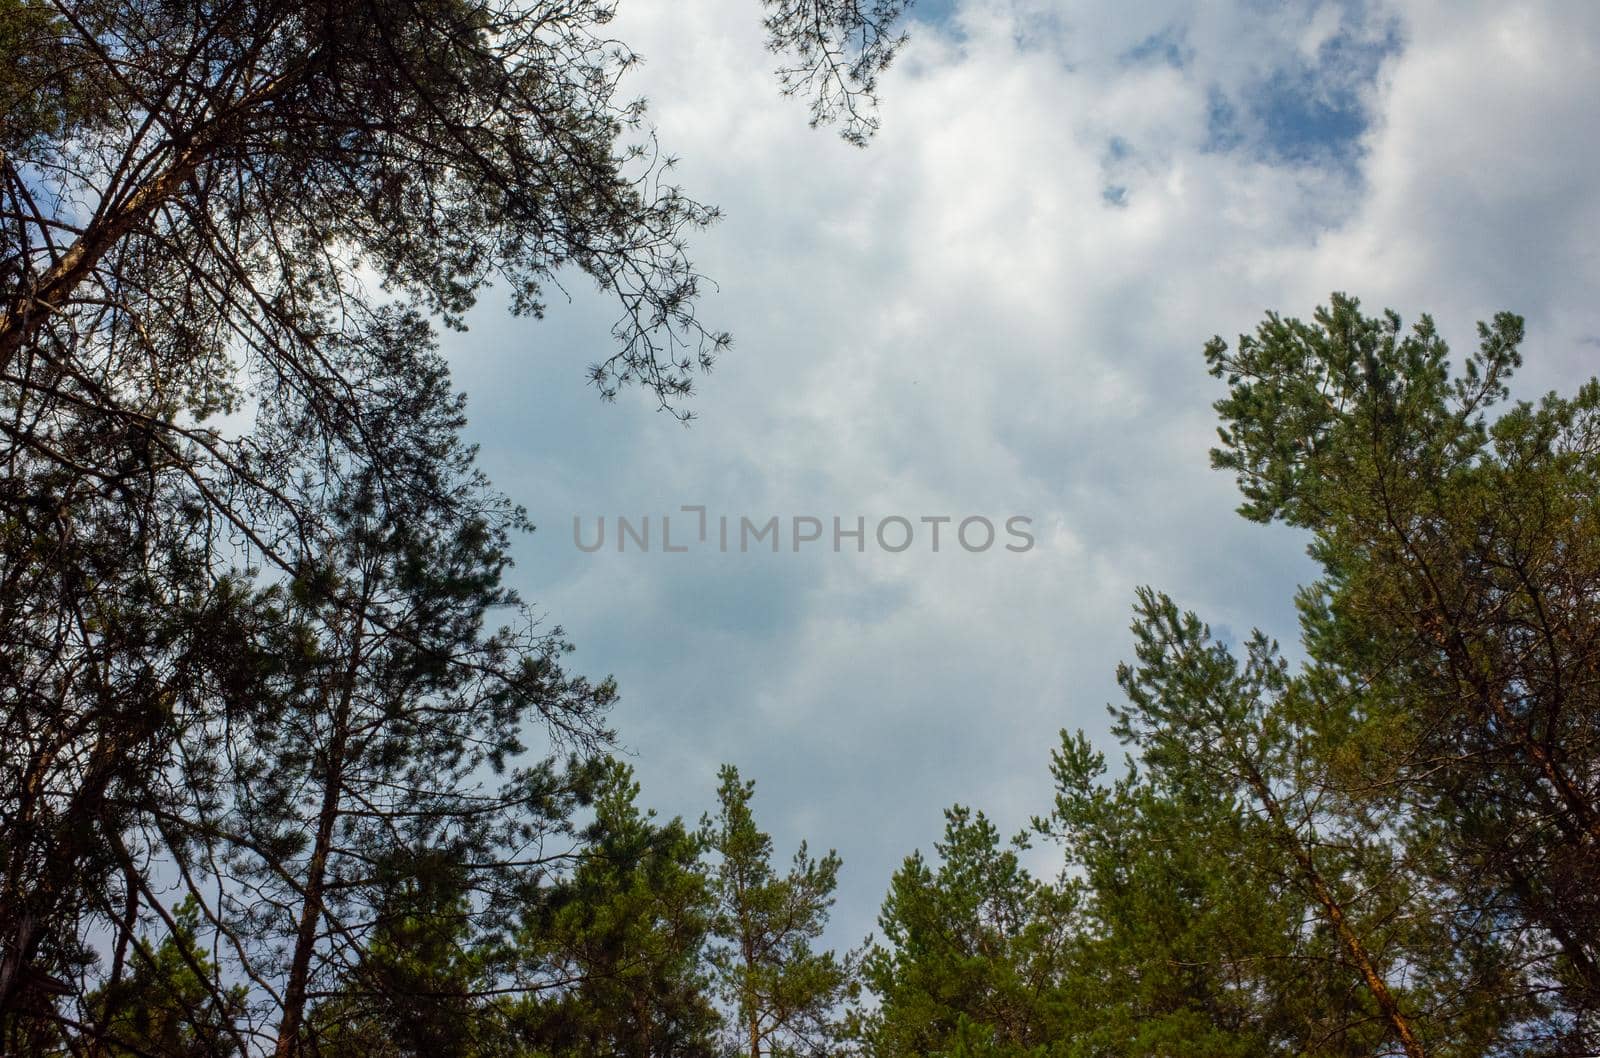 View of the thick clouds in the sky through the tall pine trees of the coniferous forest.